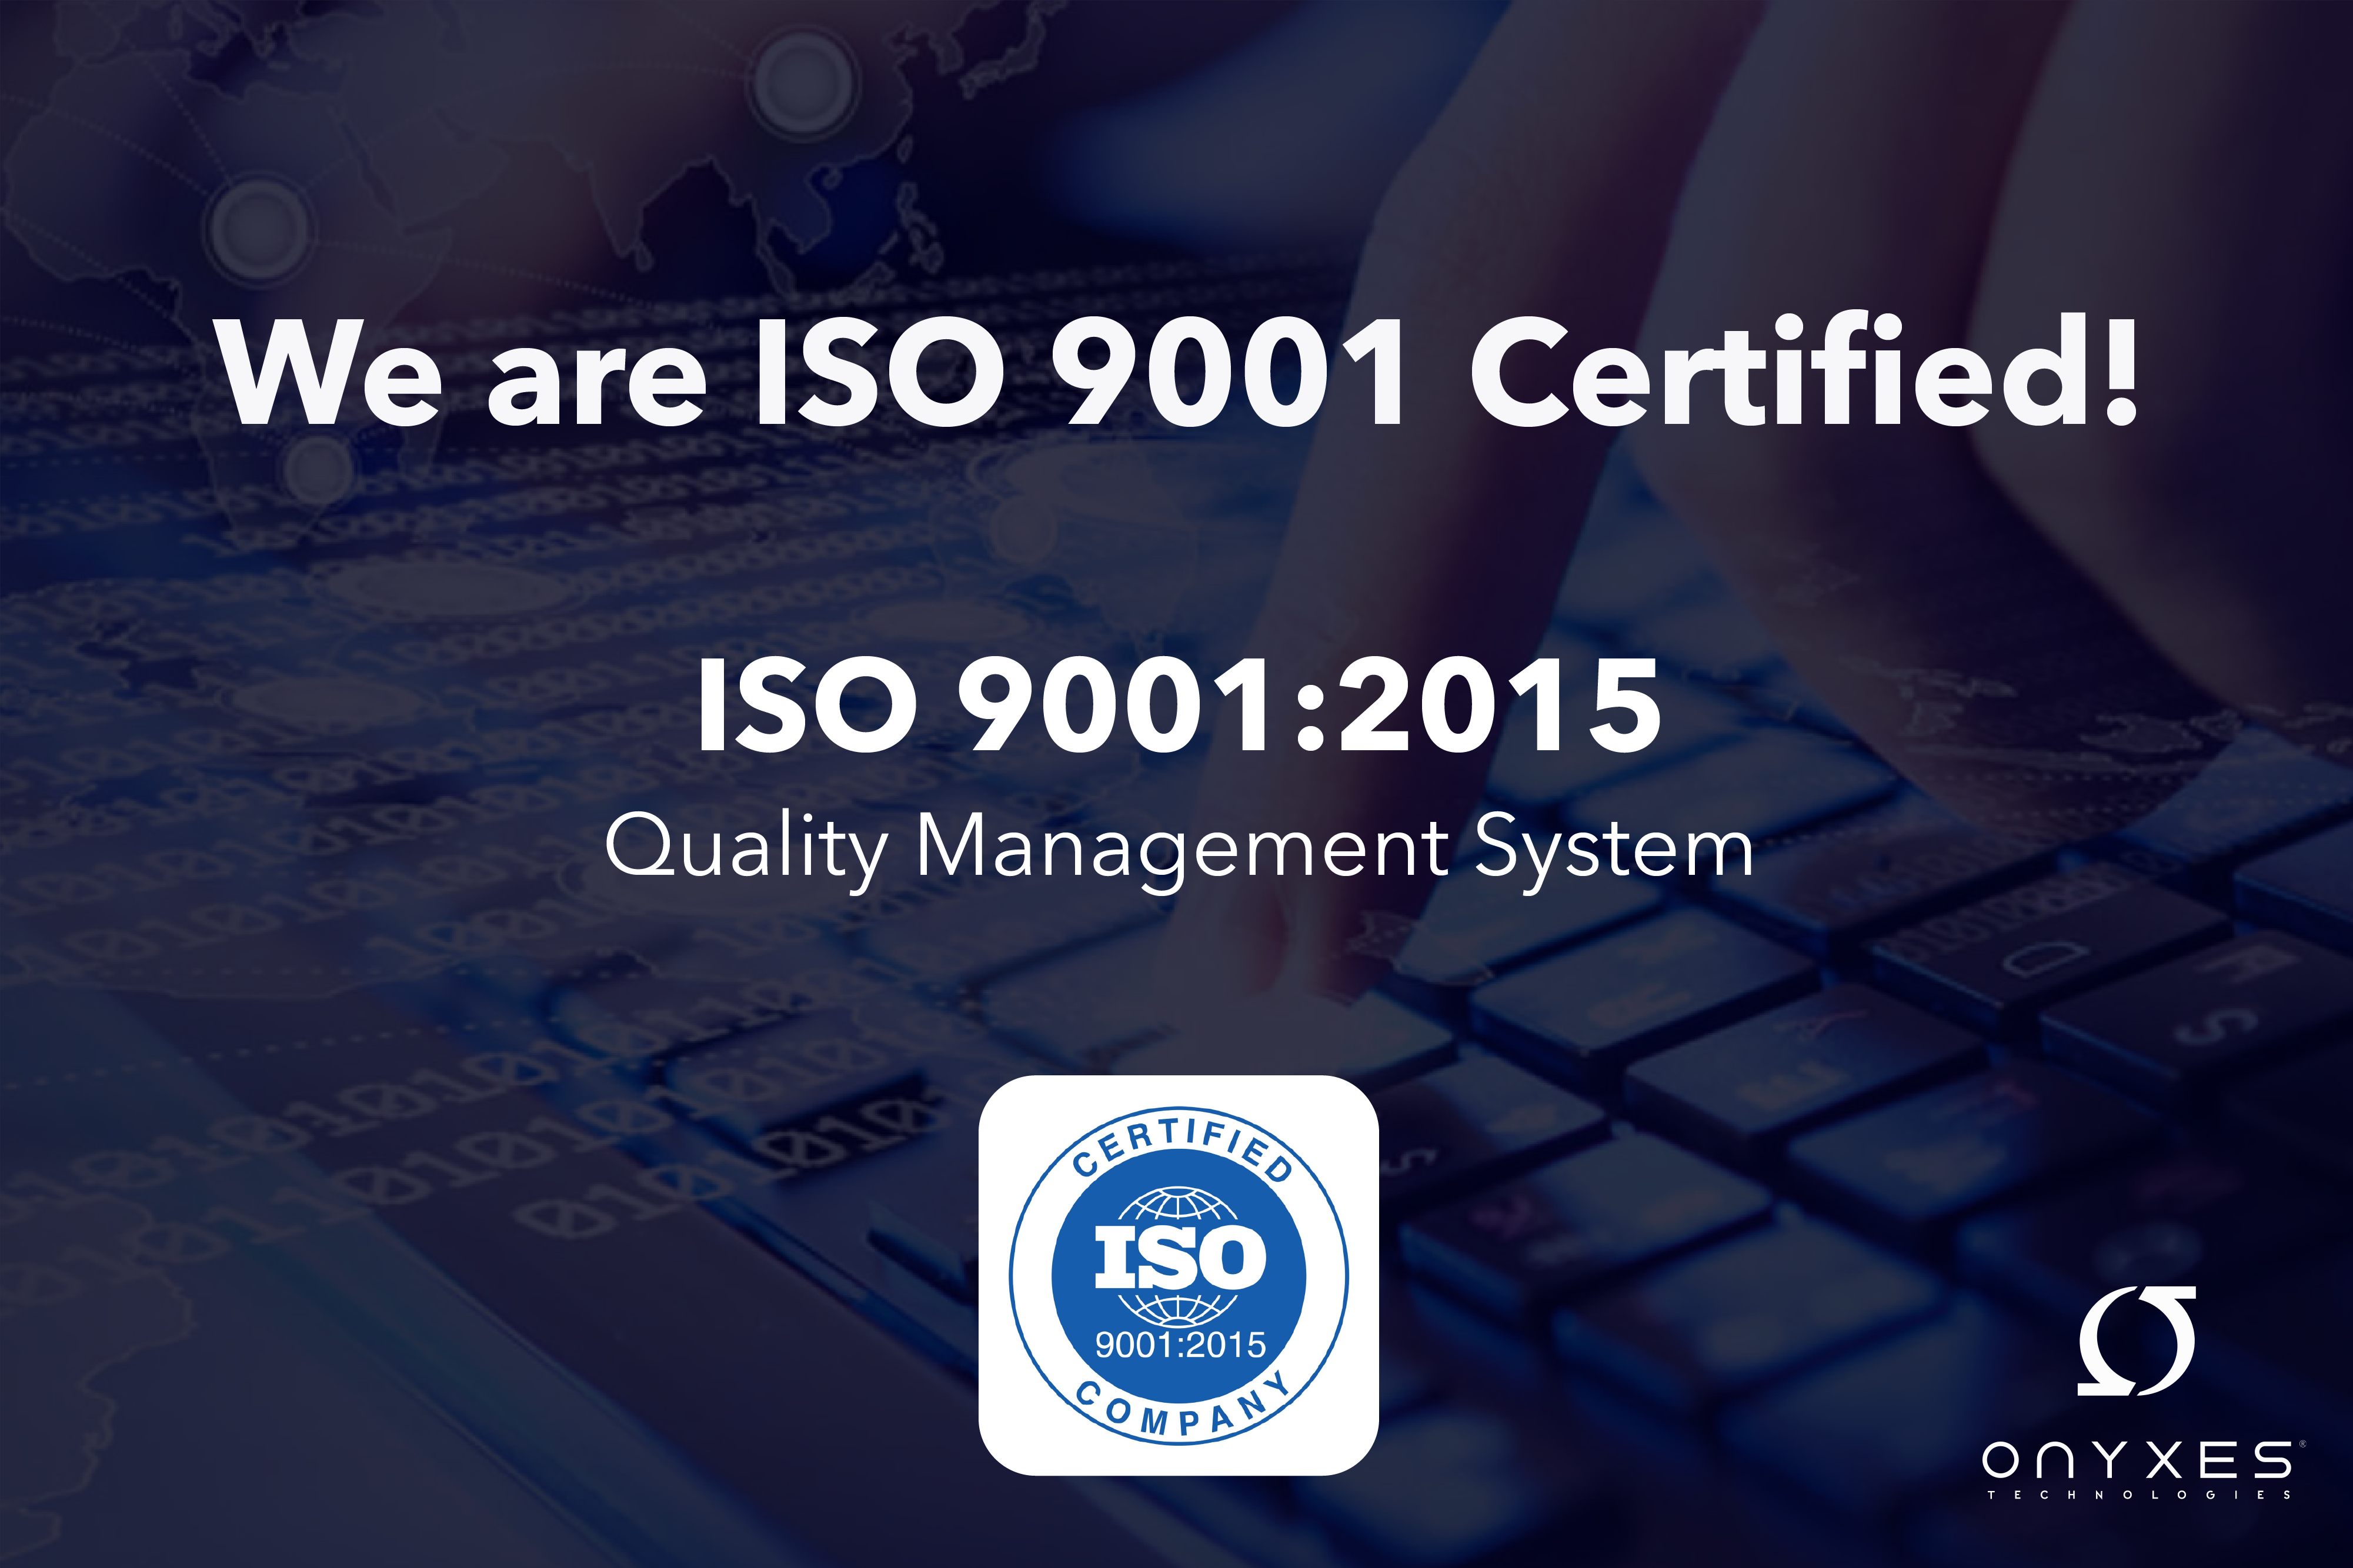 We are ISO 9001 certified !